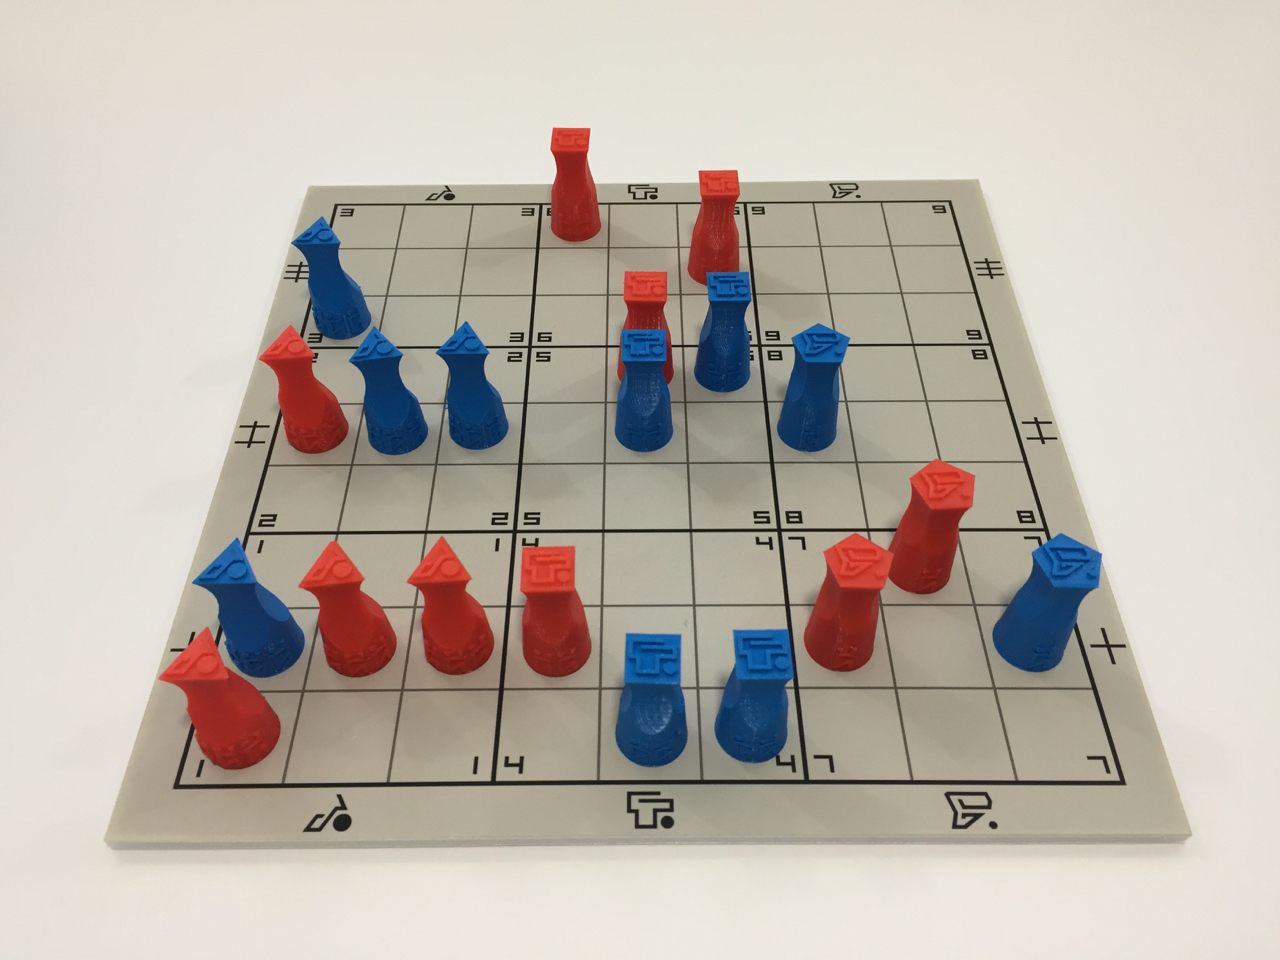 Gameplay scene from the board game OFMOS